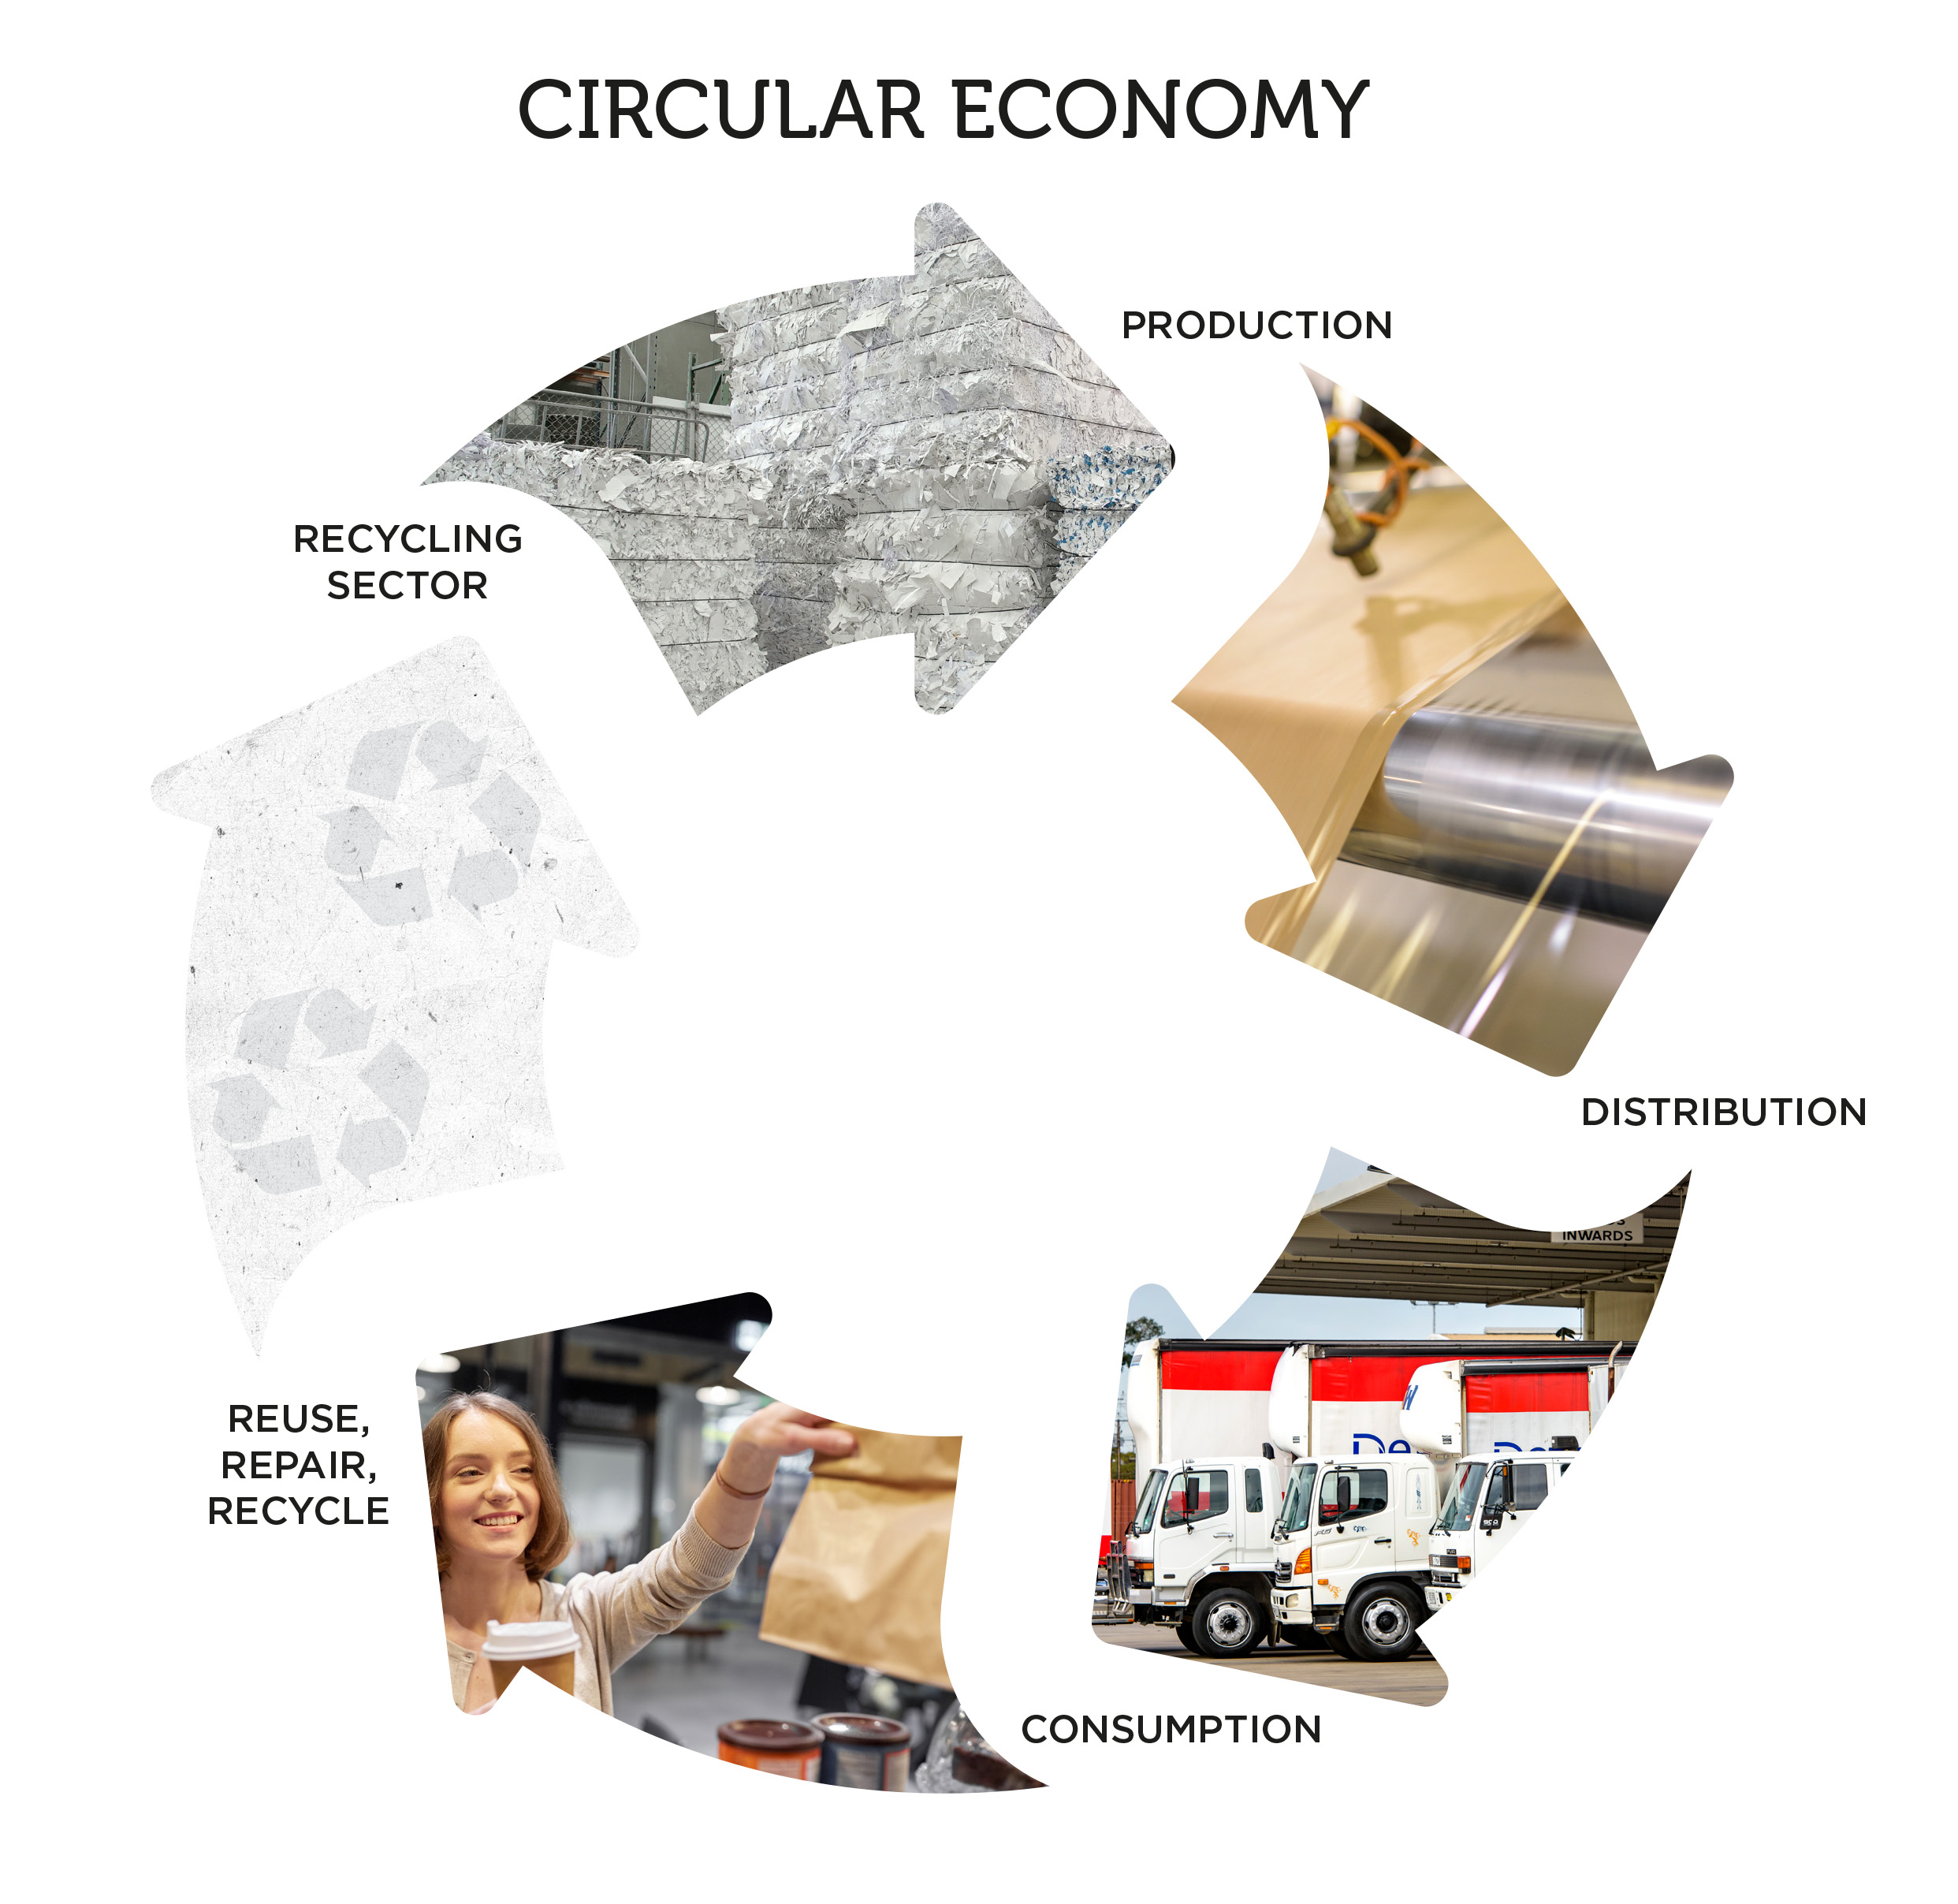 Image of a circular economy for packaging.